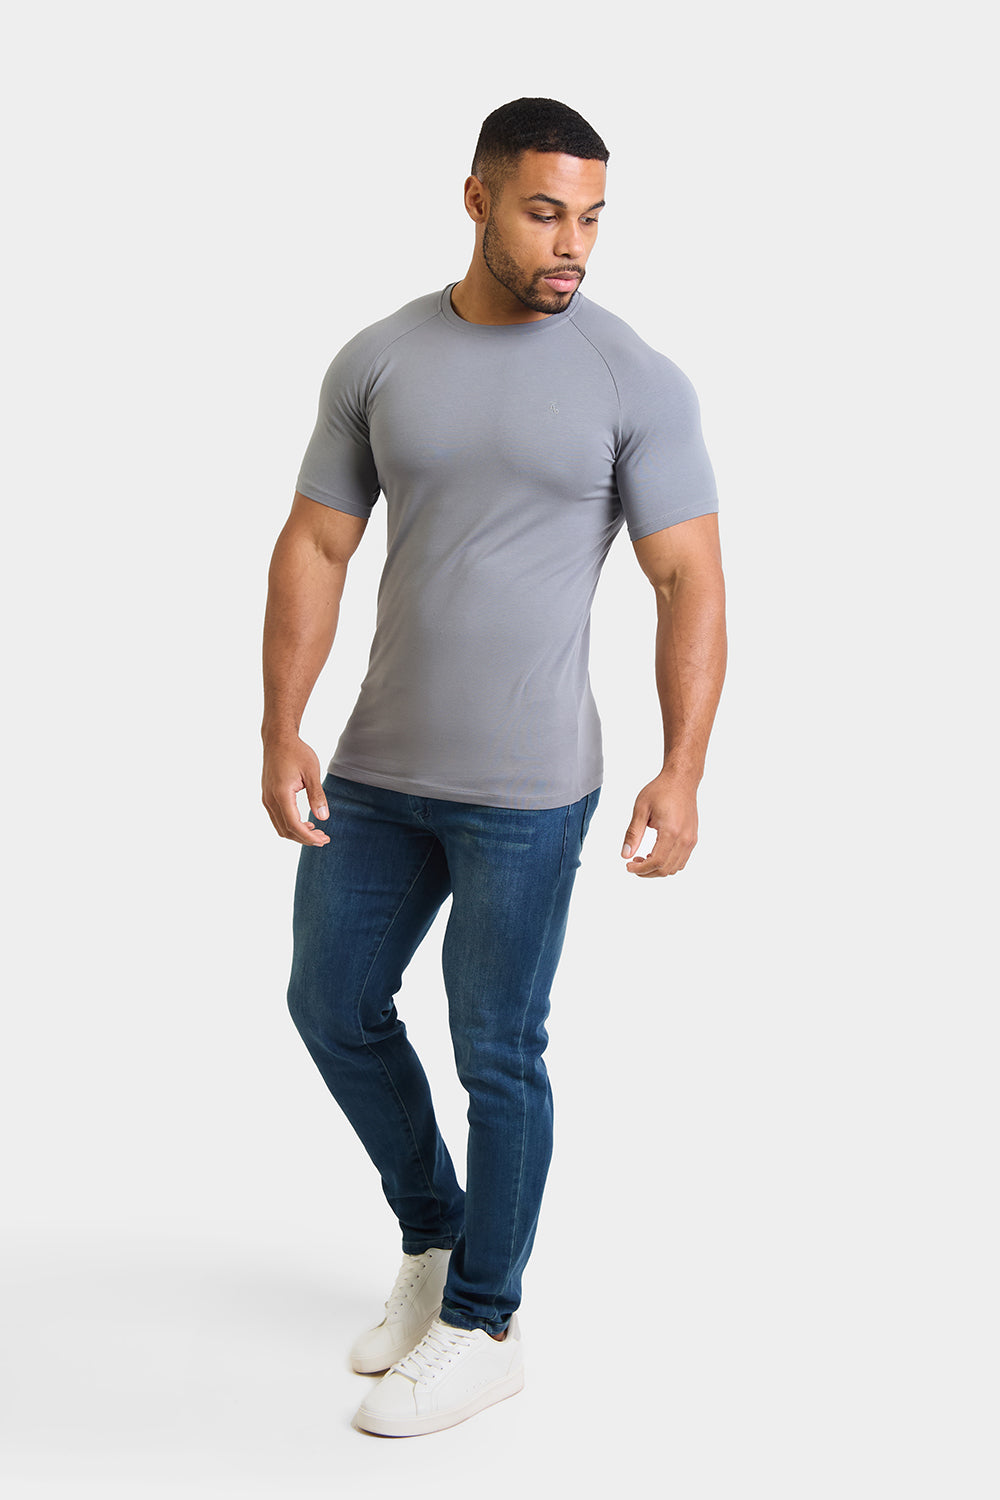 Muscle Fit T-Shirt in Lead Grey - TAILORED ATHLETE - ROW